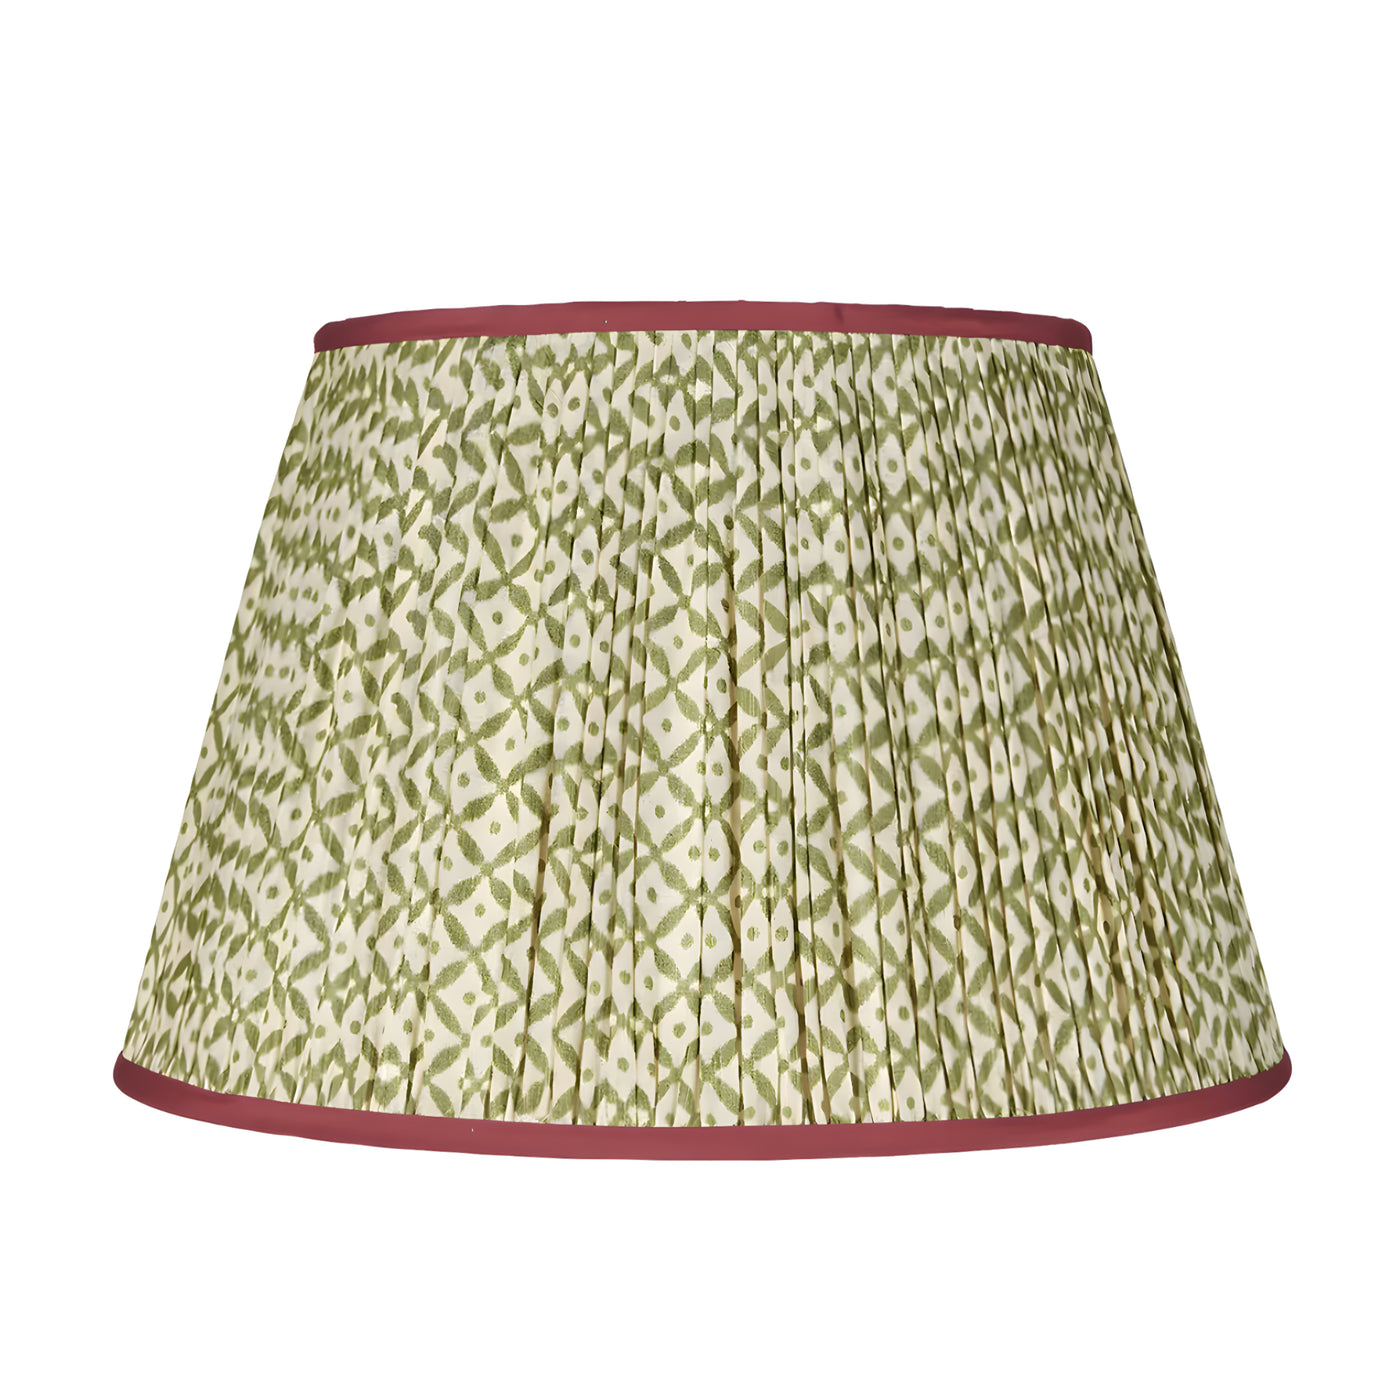 Penny Morrison Green Lampshade with red trim